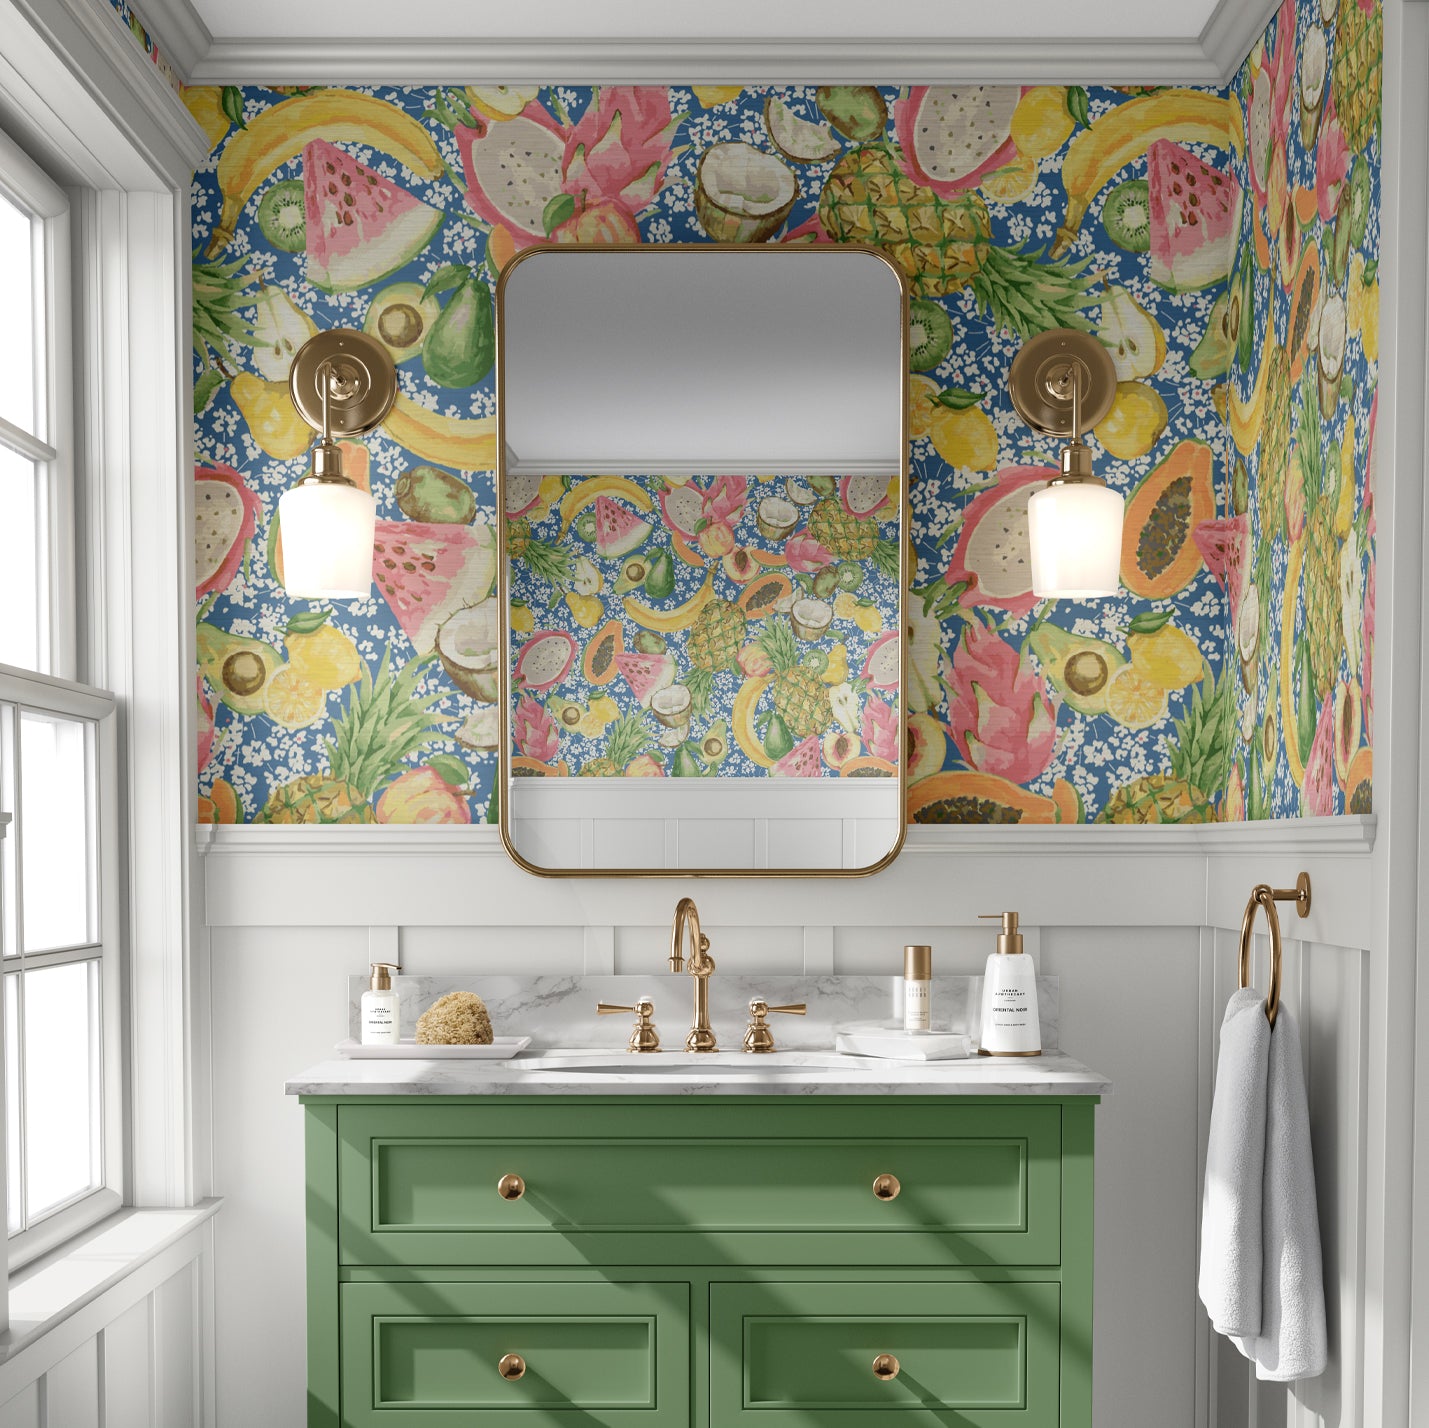 Bathroom with grasscloth wallpaper hand painted with watercolors, blue based print with white ditsy florals with tossed fruit layered on top including: pineapples, limes, bananas, avocados, lemons, pears, peaches, watermelon, coconuts, mangos, bananas and passion fruit